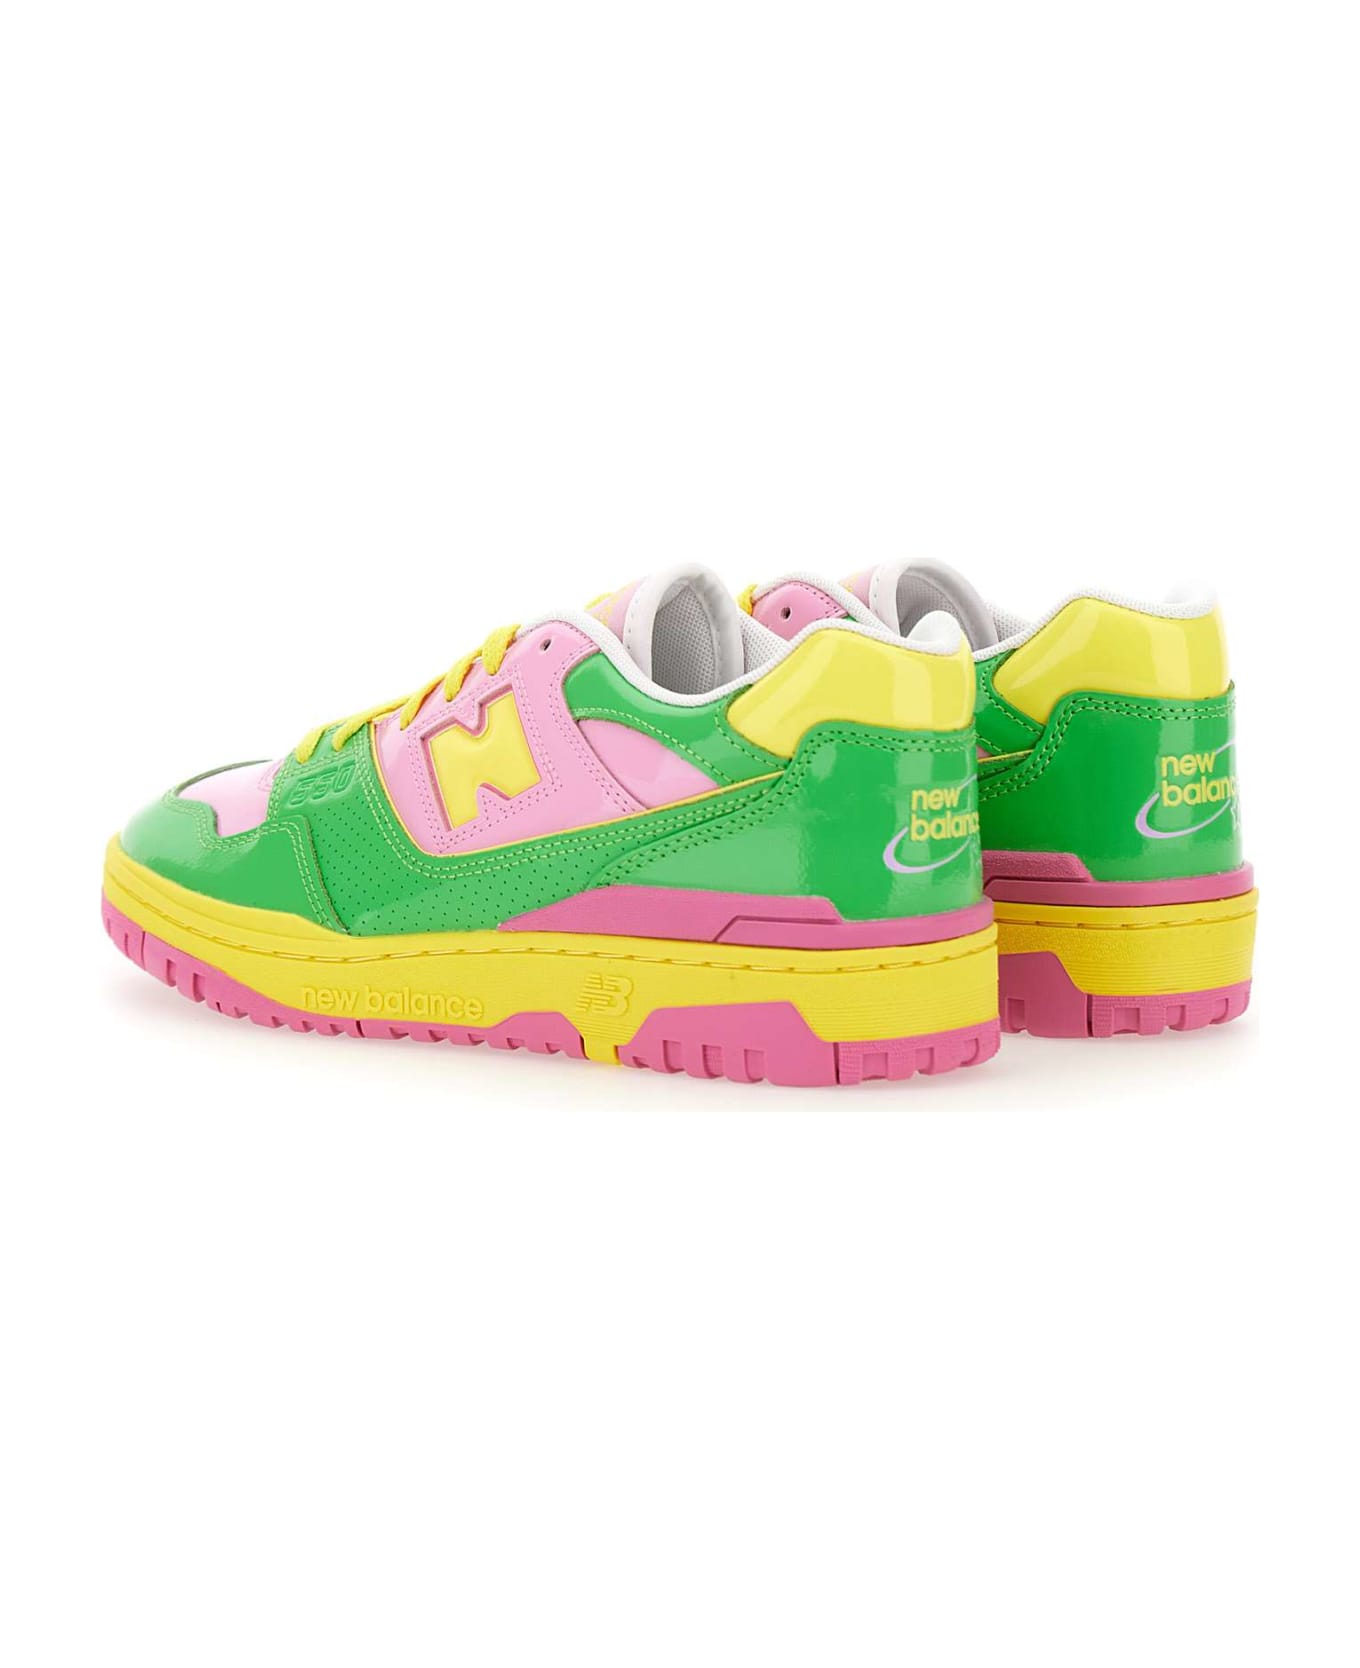 New Balance "bb550" Sneakers - Pink-green-lime スニーカー